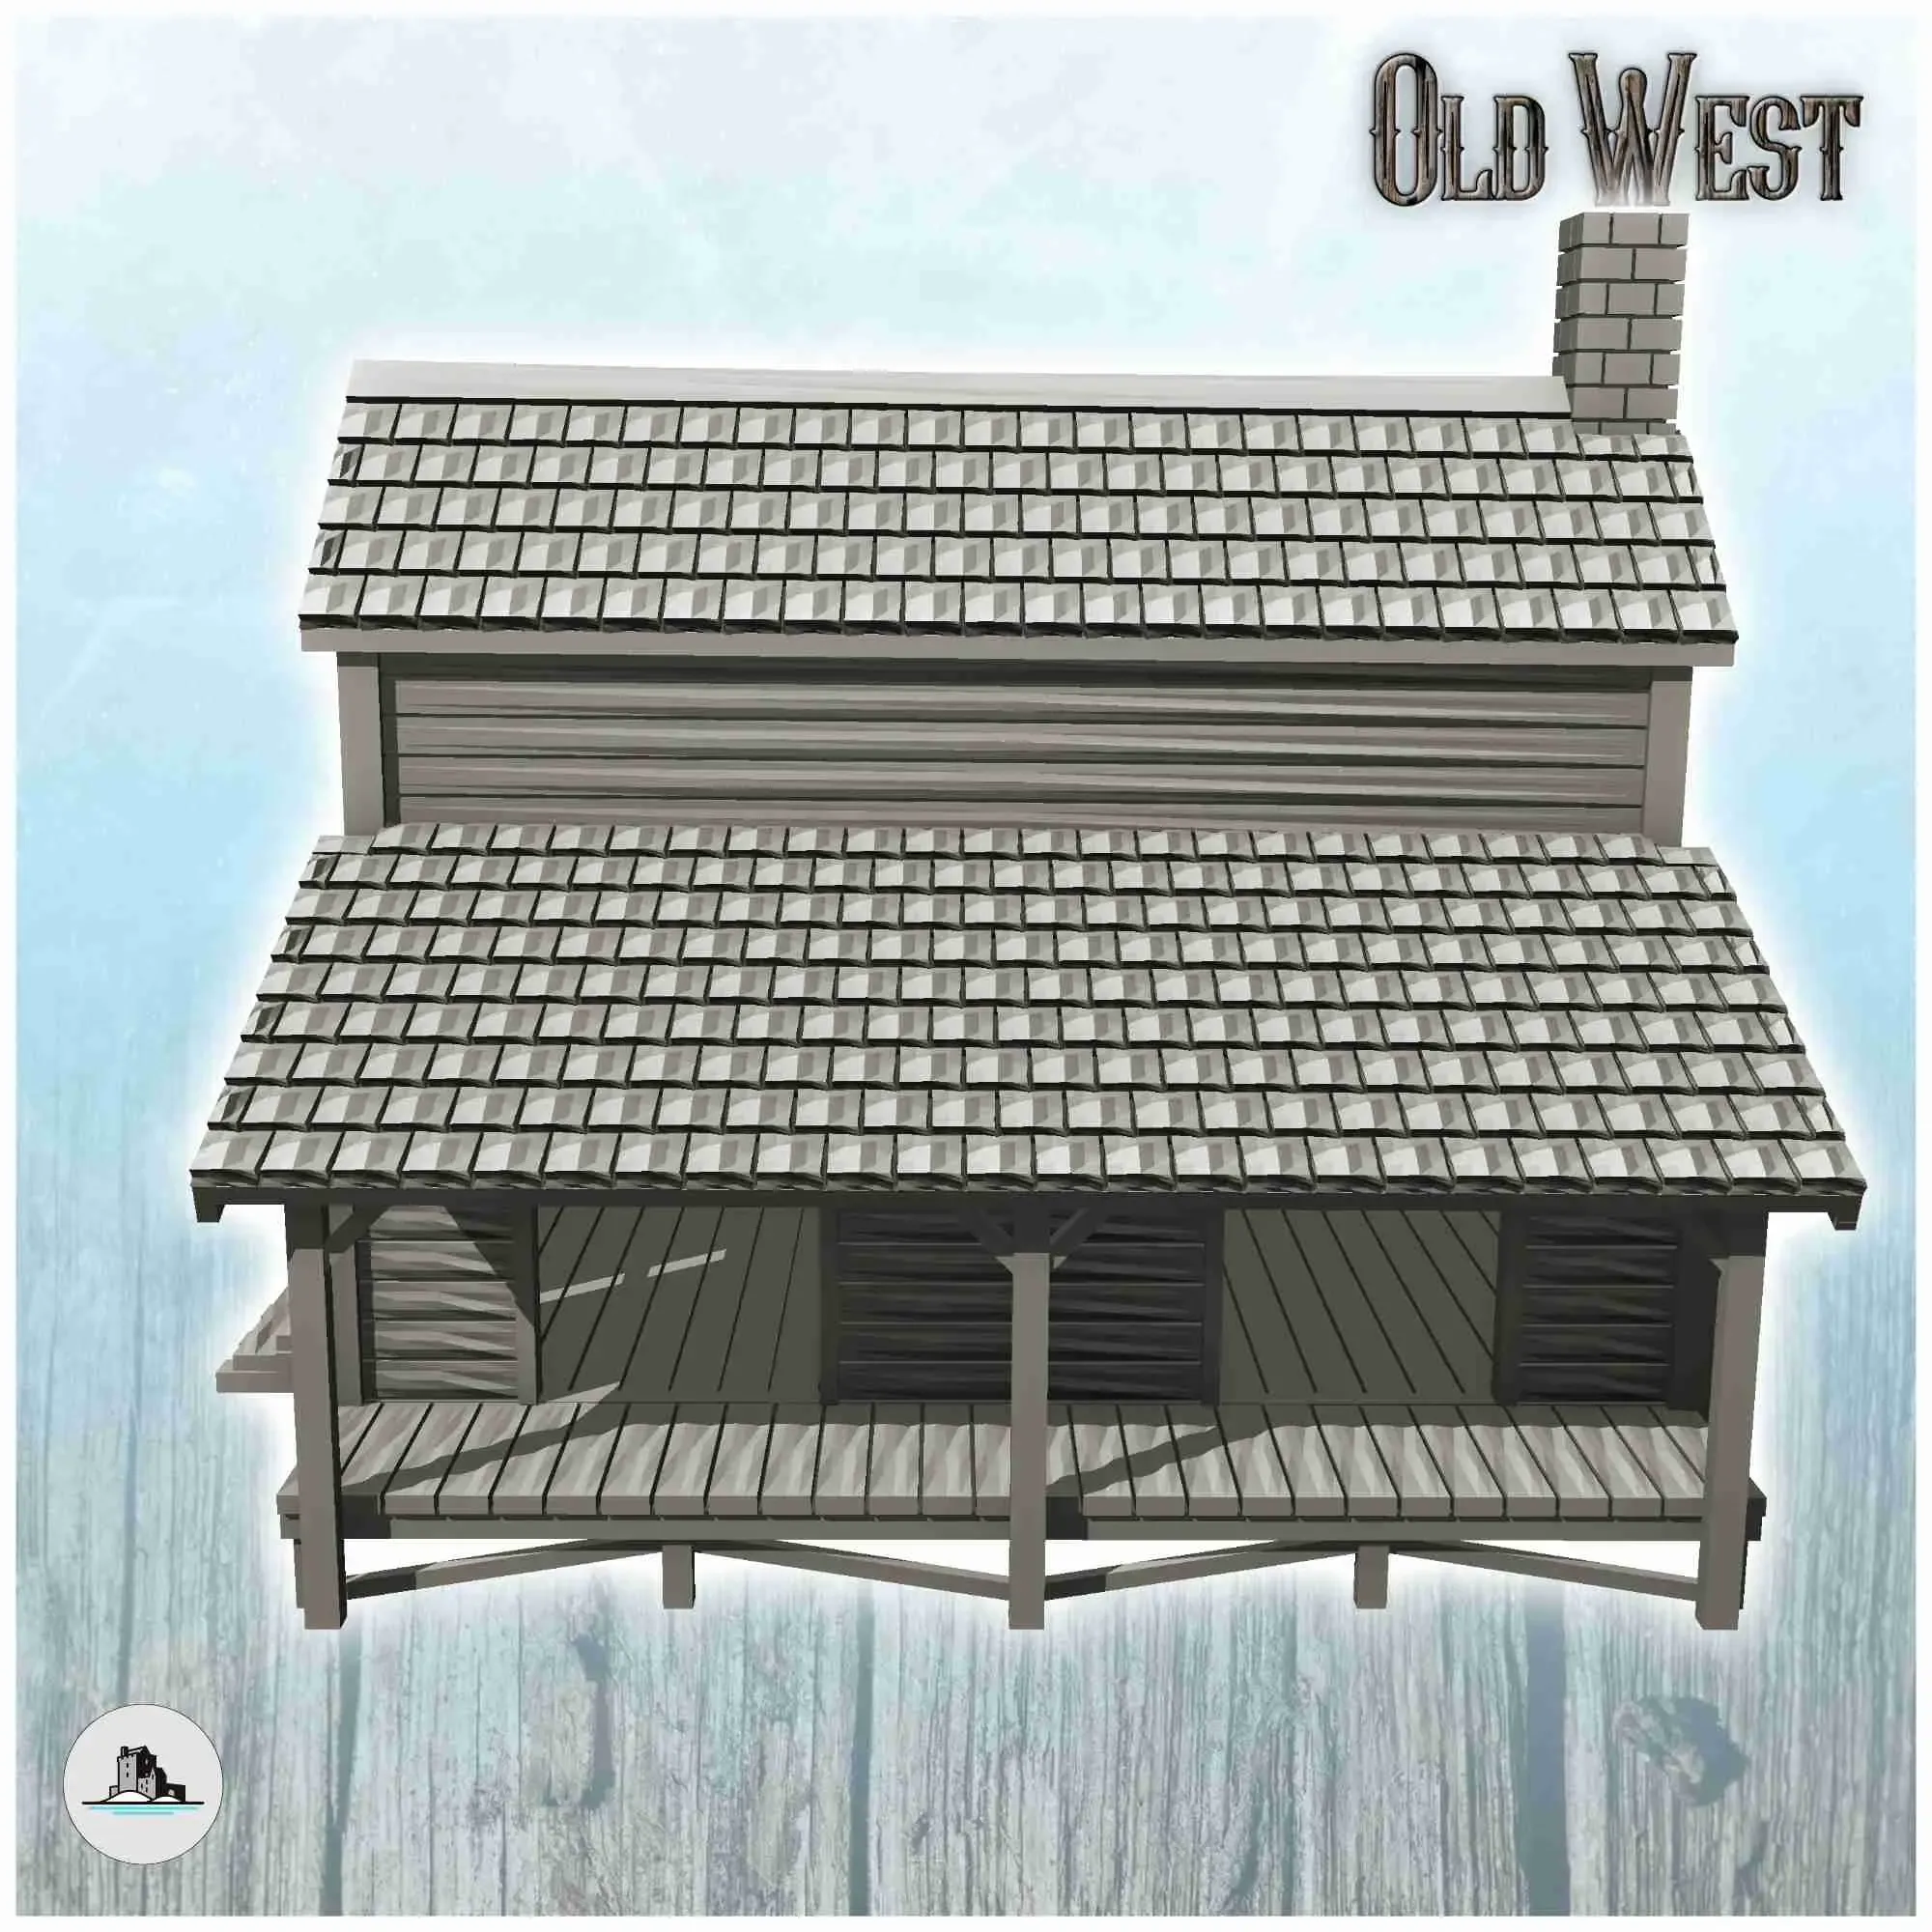 Wooden western house with roof terrace (29) - miniatures ACW